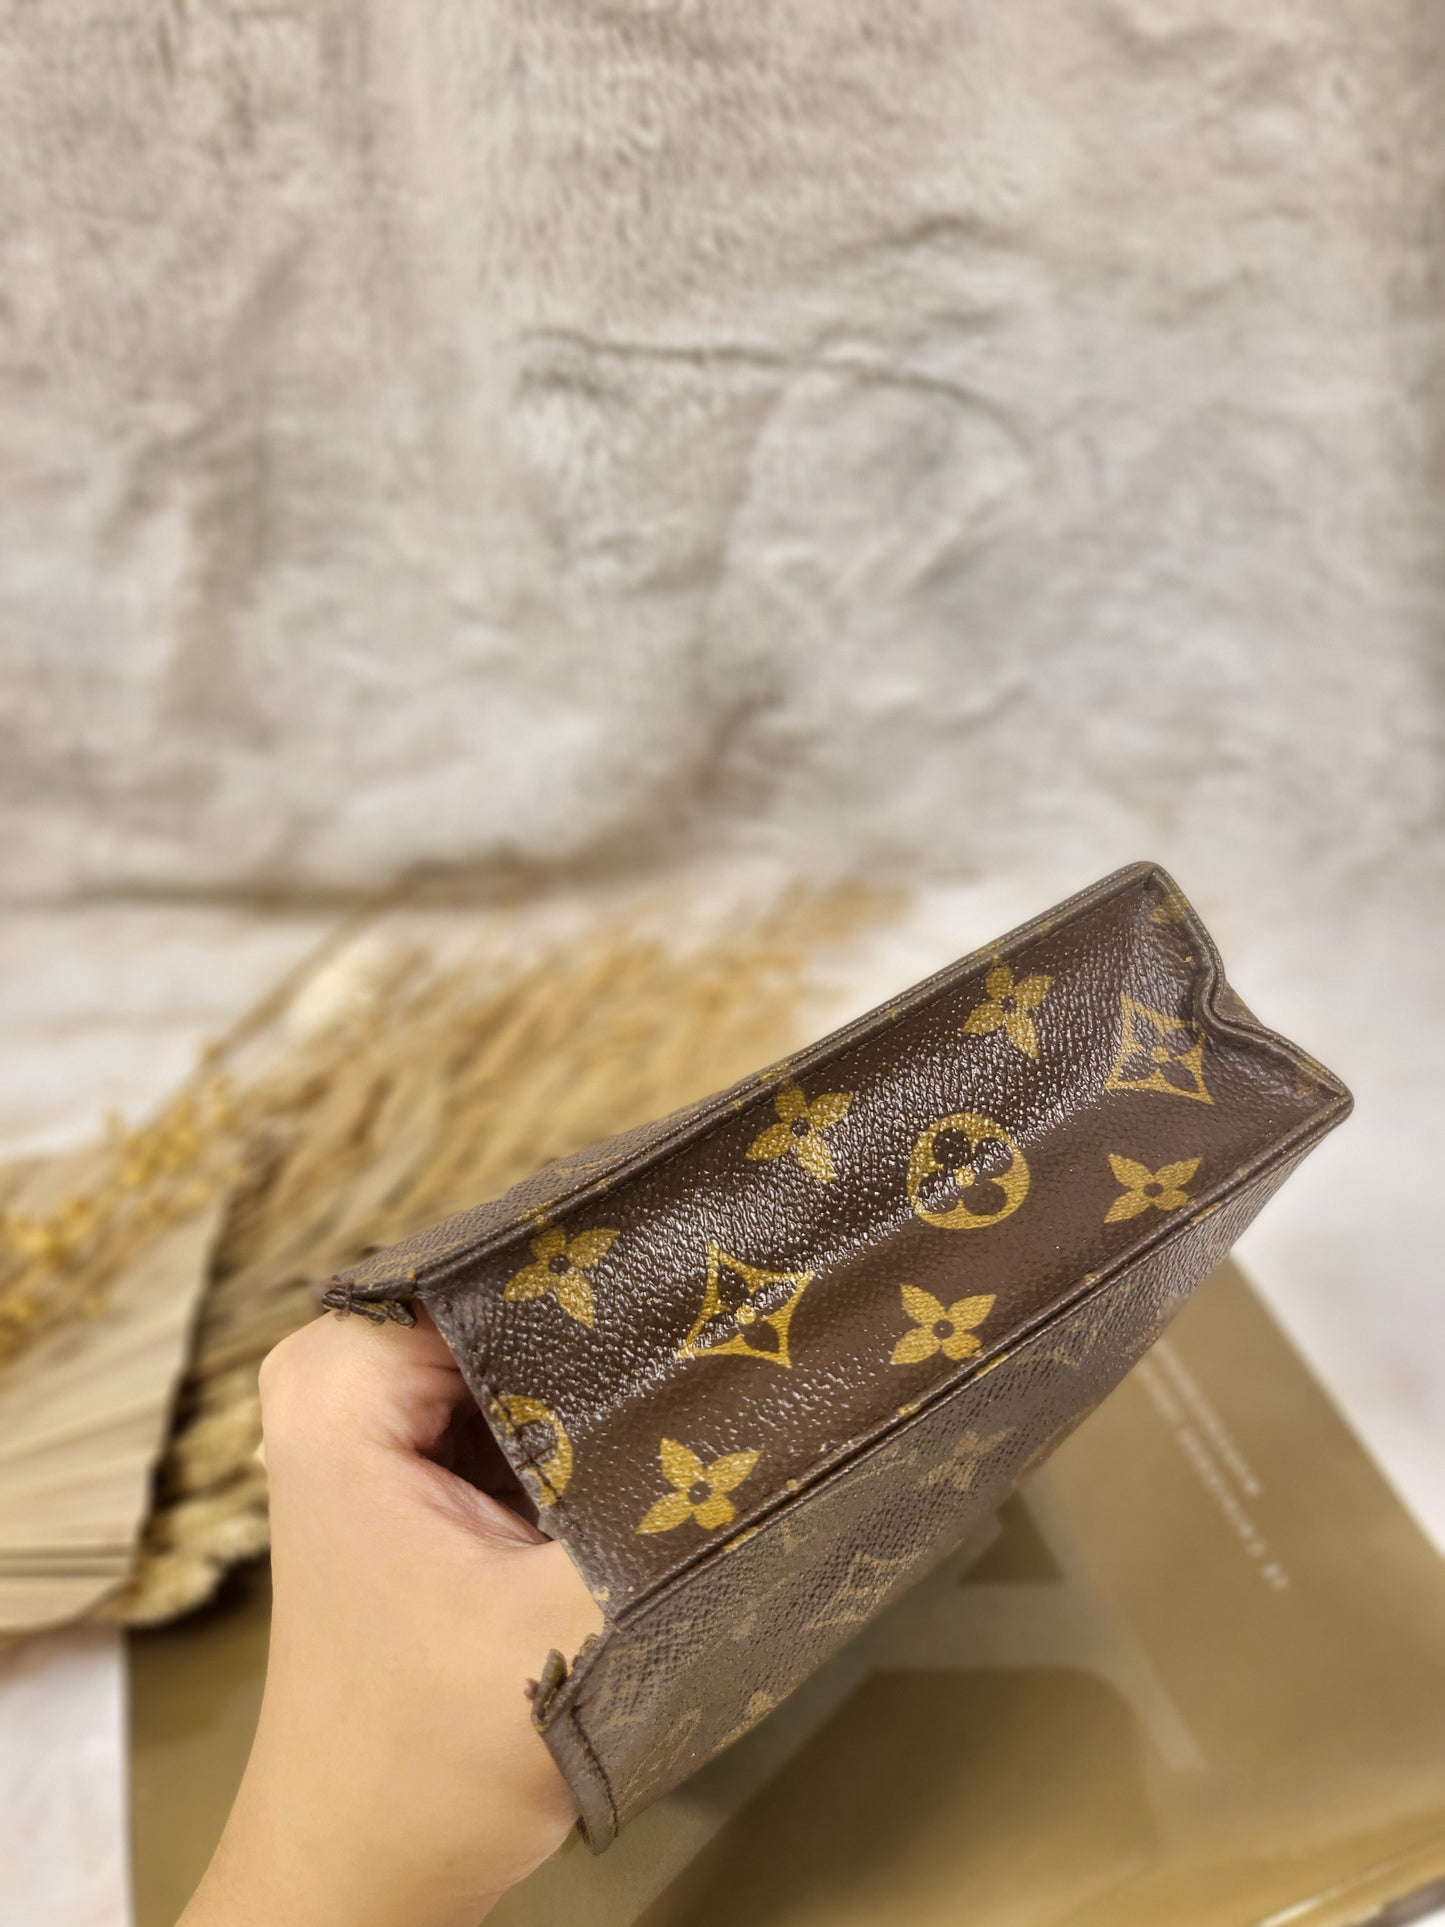 Authentic pre-owned Louis Vuitton toiletry 19 make up bag